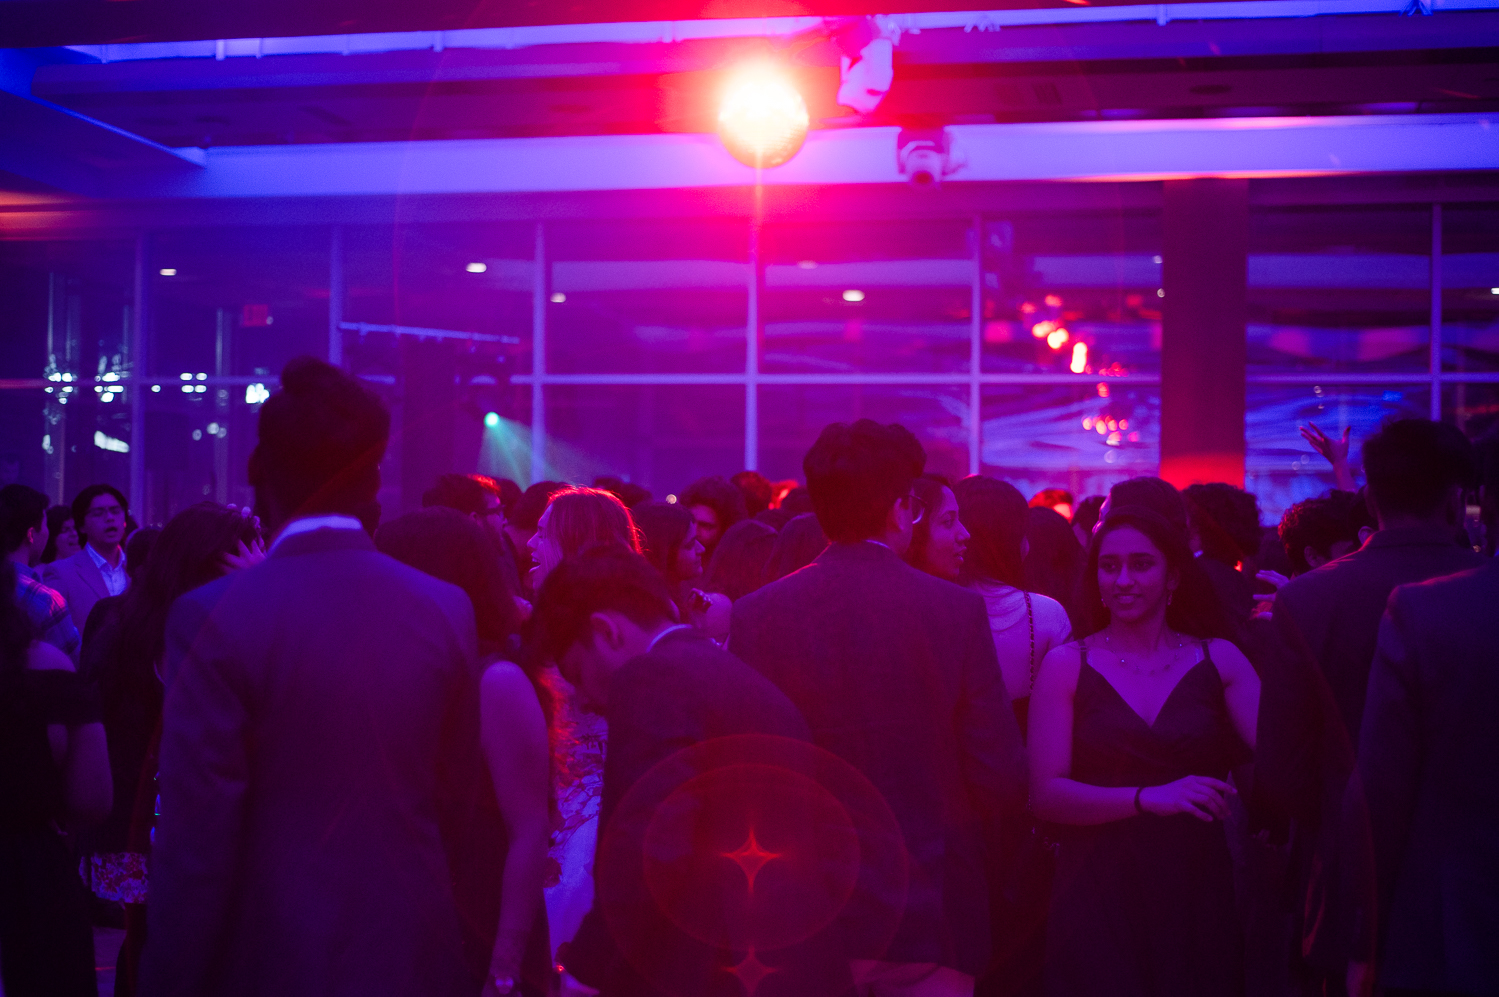 People in formalwear dance on a dance floor. The room is mostly dark, but basked in purple light. A bright orange light appears to be hanging from the ceiling.